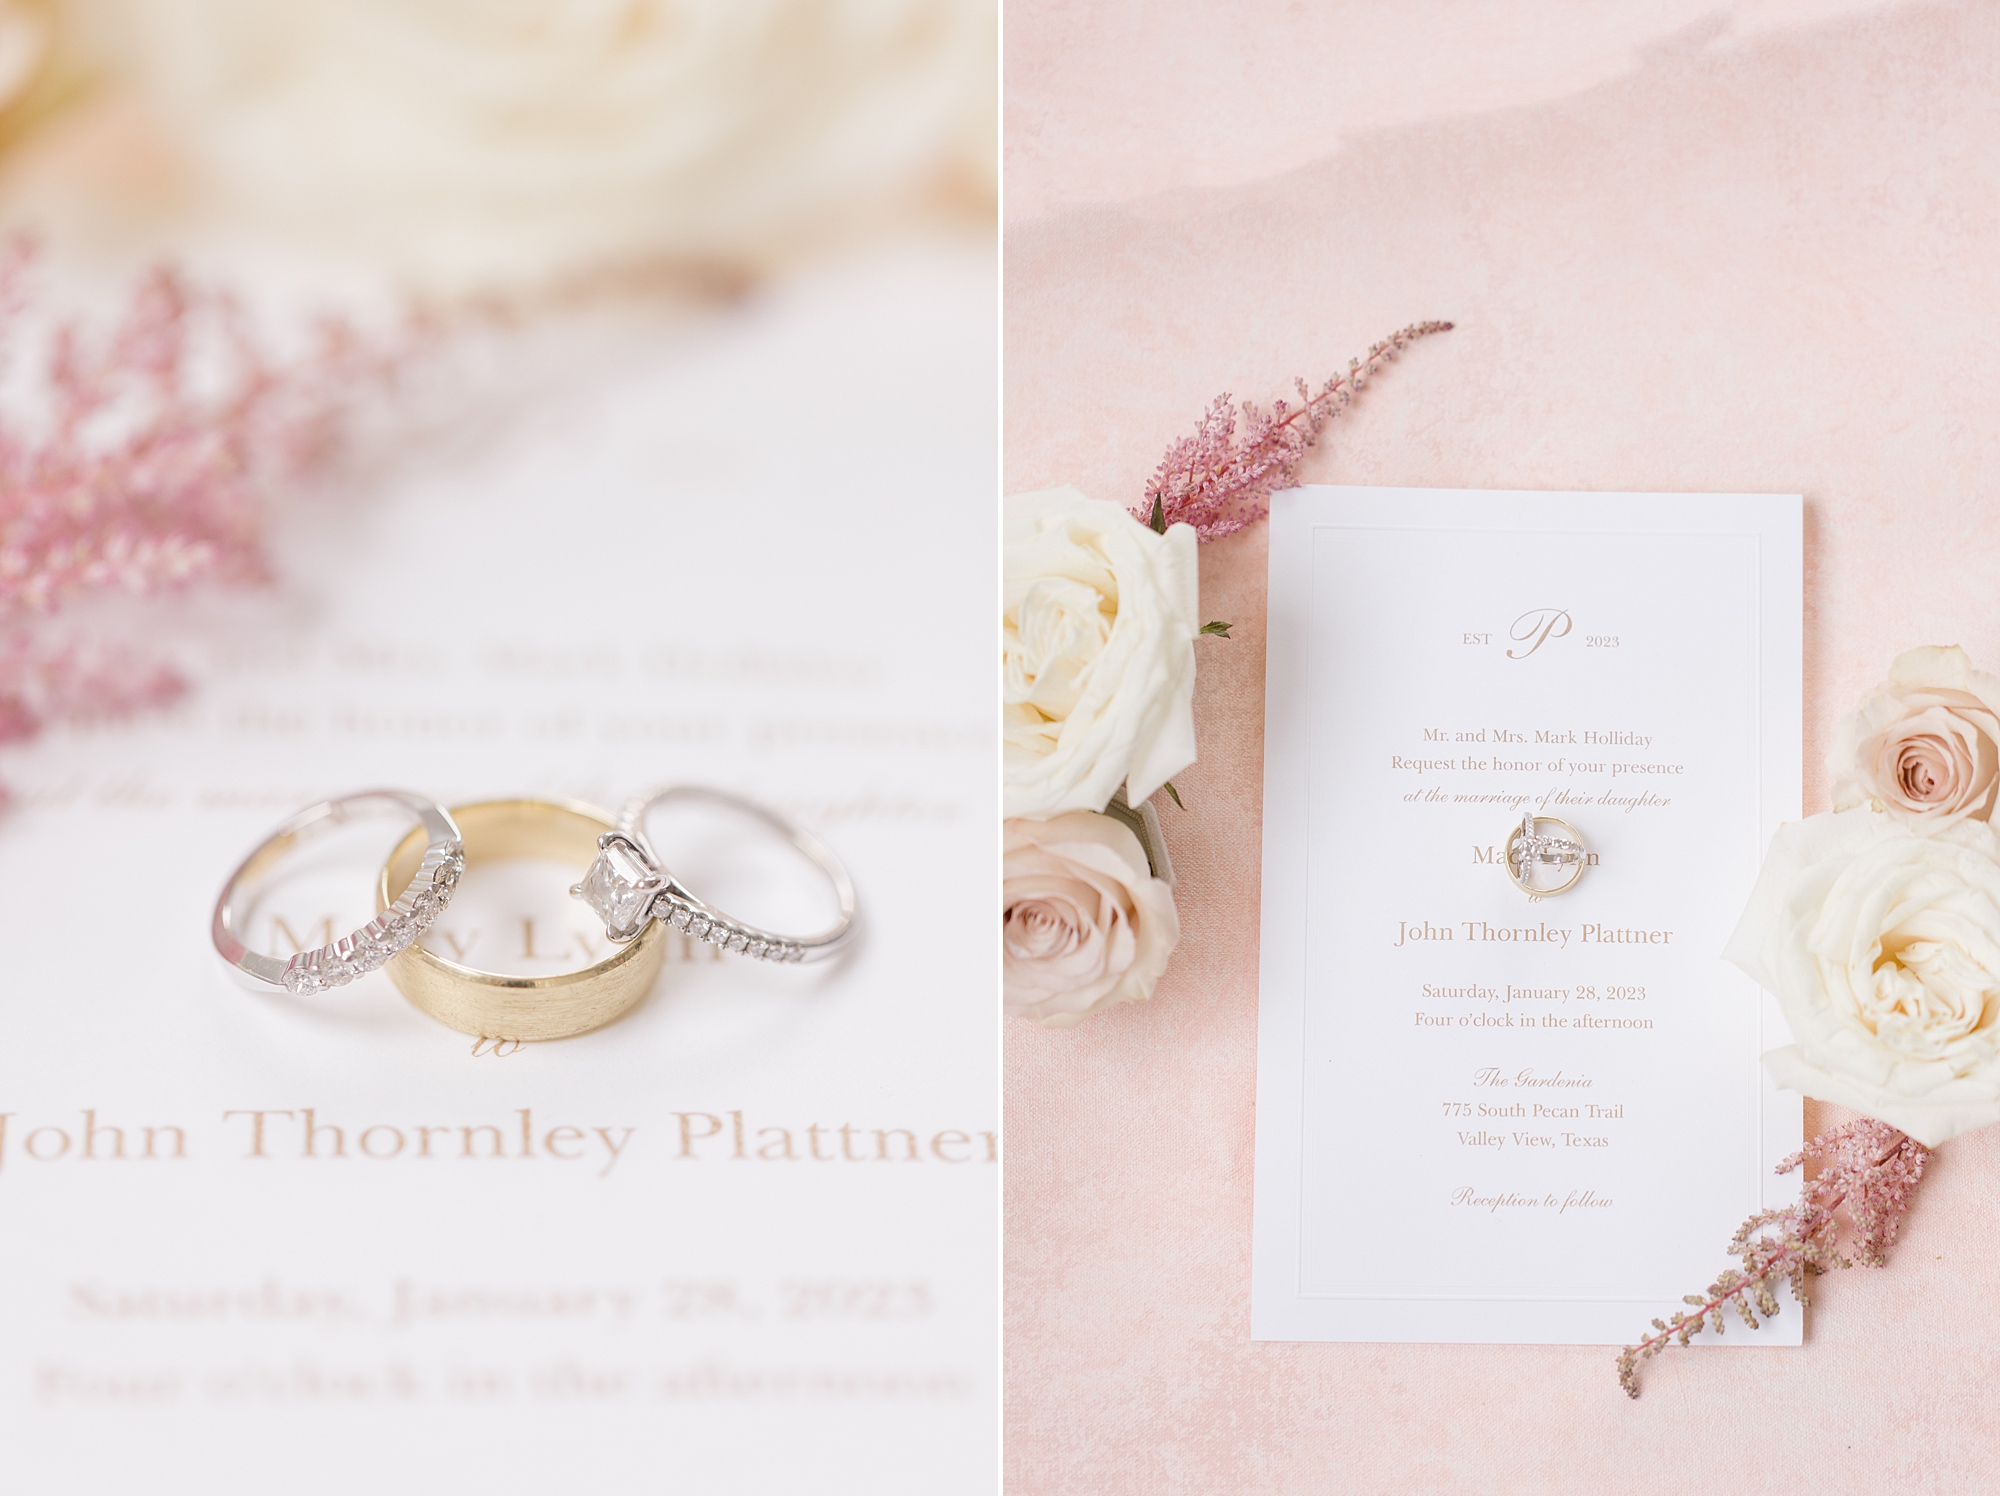 wedding rings rest on invitation suite for winter wedding at The Gardenia